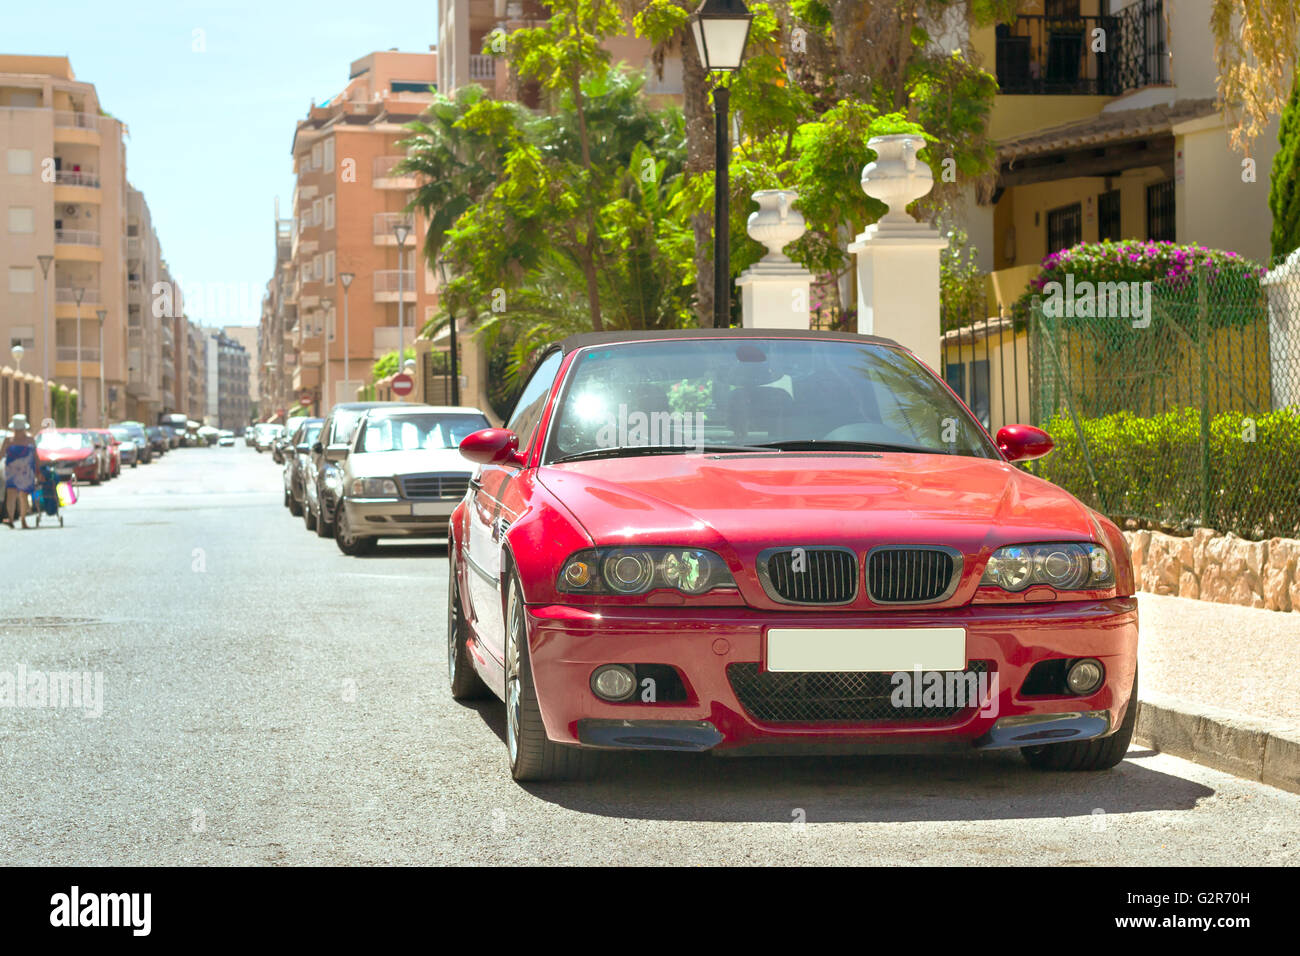 TORREVIEJA, SPAIN - SEPTEMBER 13, 2014: Red modern coupe-car BMW M3 series on sunny street, Calle Jacinto Benavente, Torrevieja Stock Photo